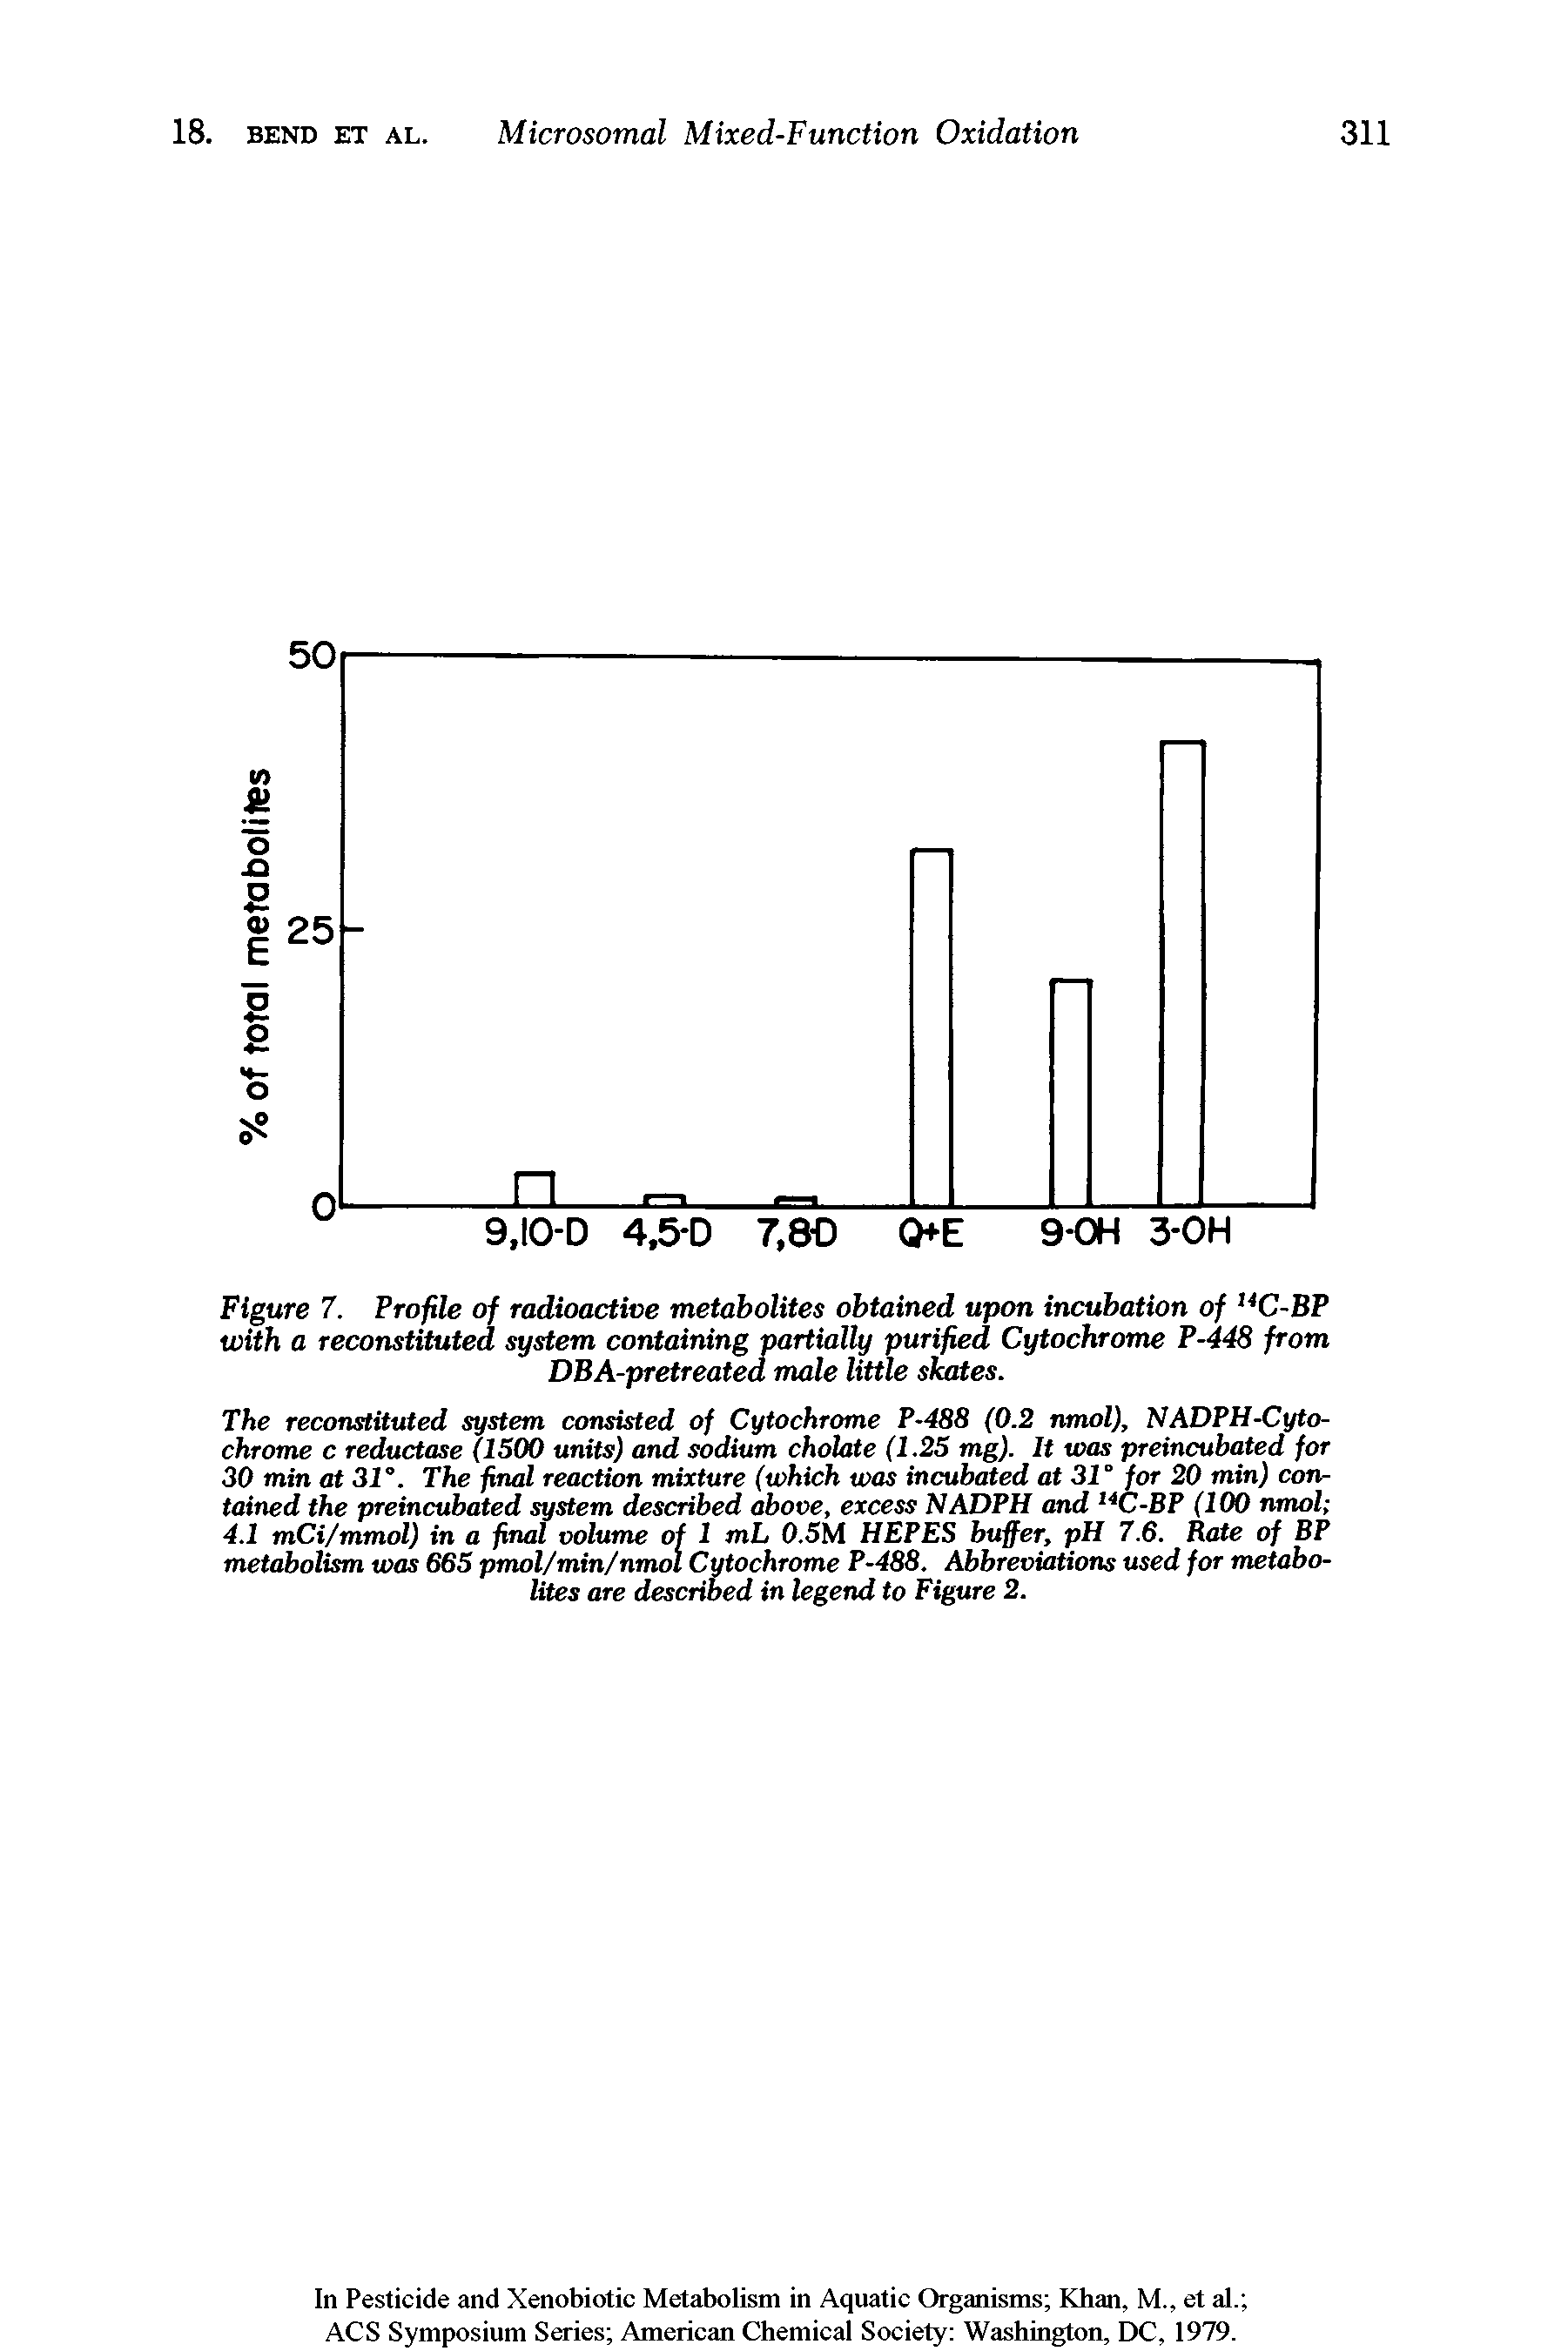 Figure 7. Profile of radioactive metabolites obtained upon incubation of UC-BP with a reconstituted system containing partially purified Cytochrome P-448 from DBA-pretreatea male little skates.